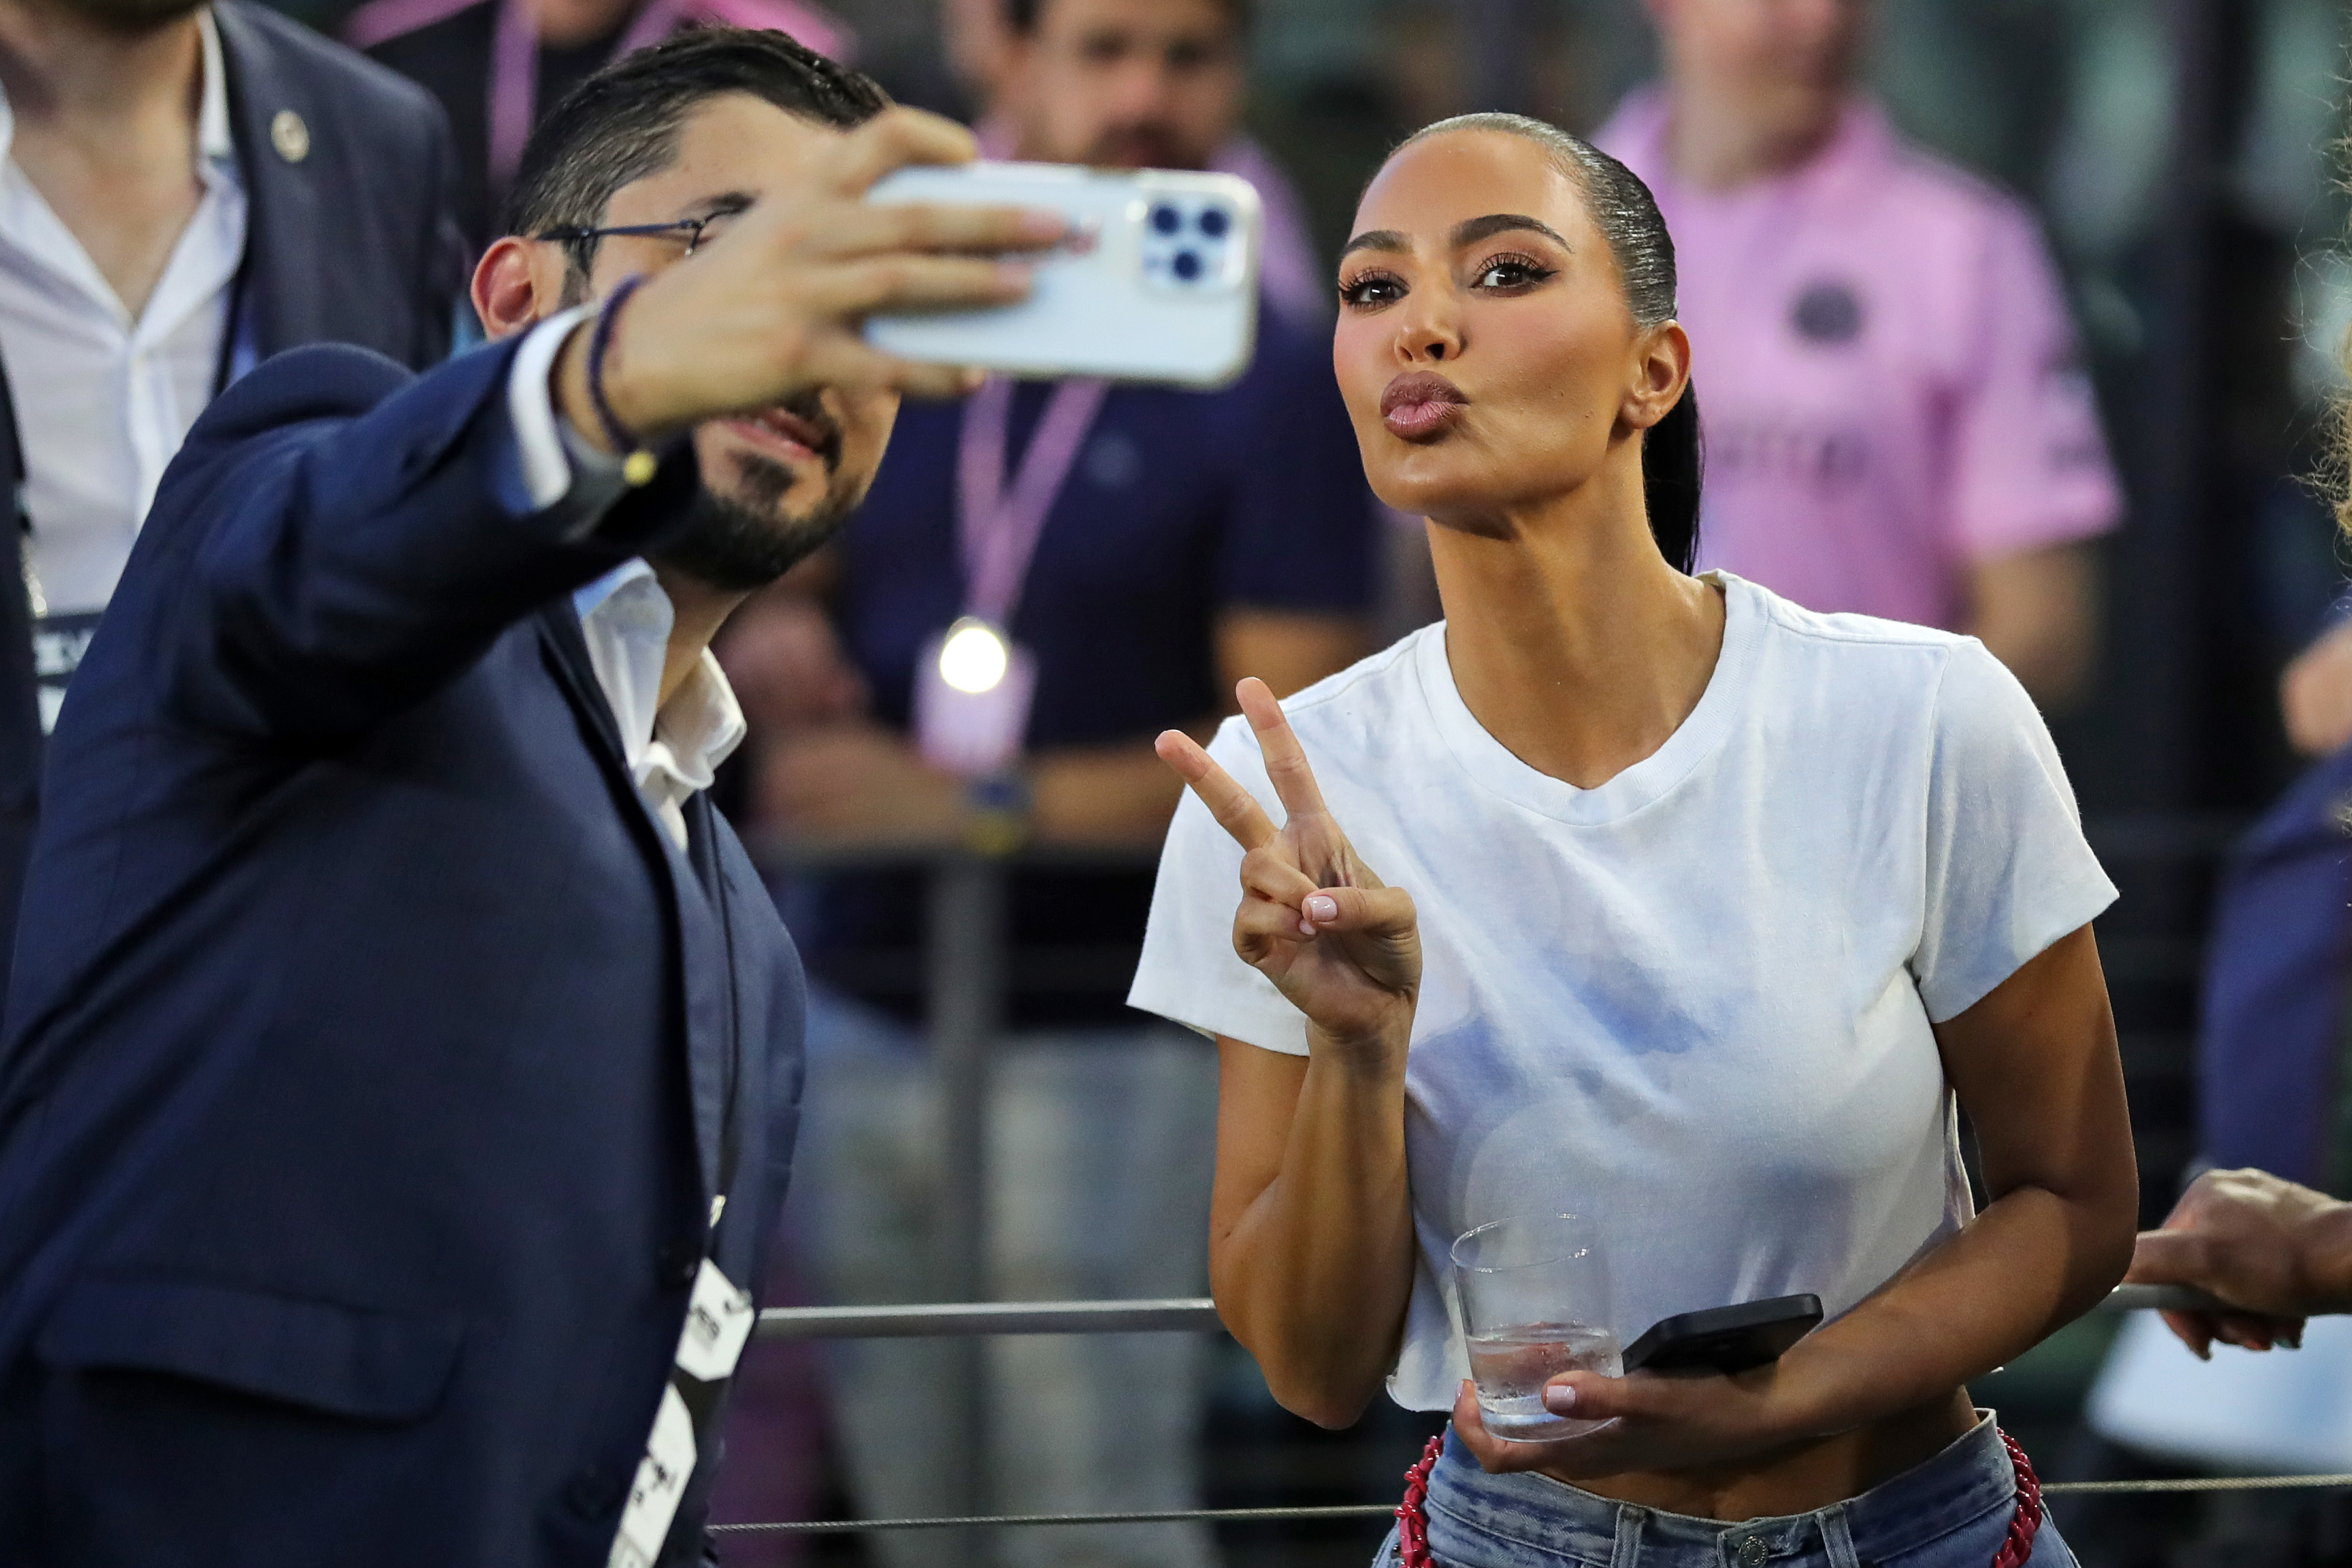 Kim Kardashian gives the peace sign and pouts as she takes a picture with a fan